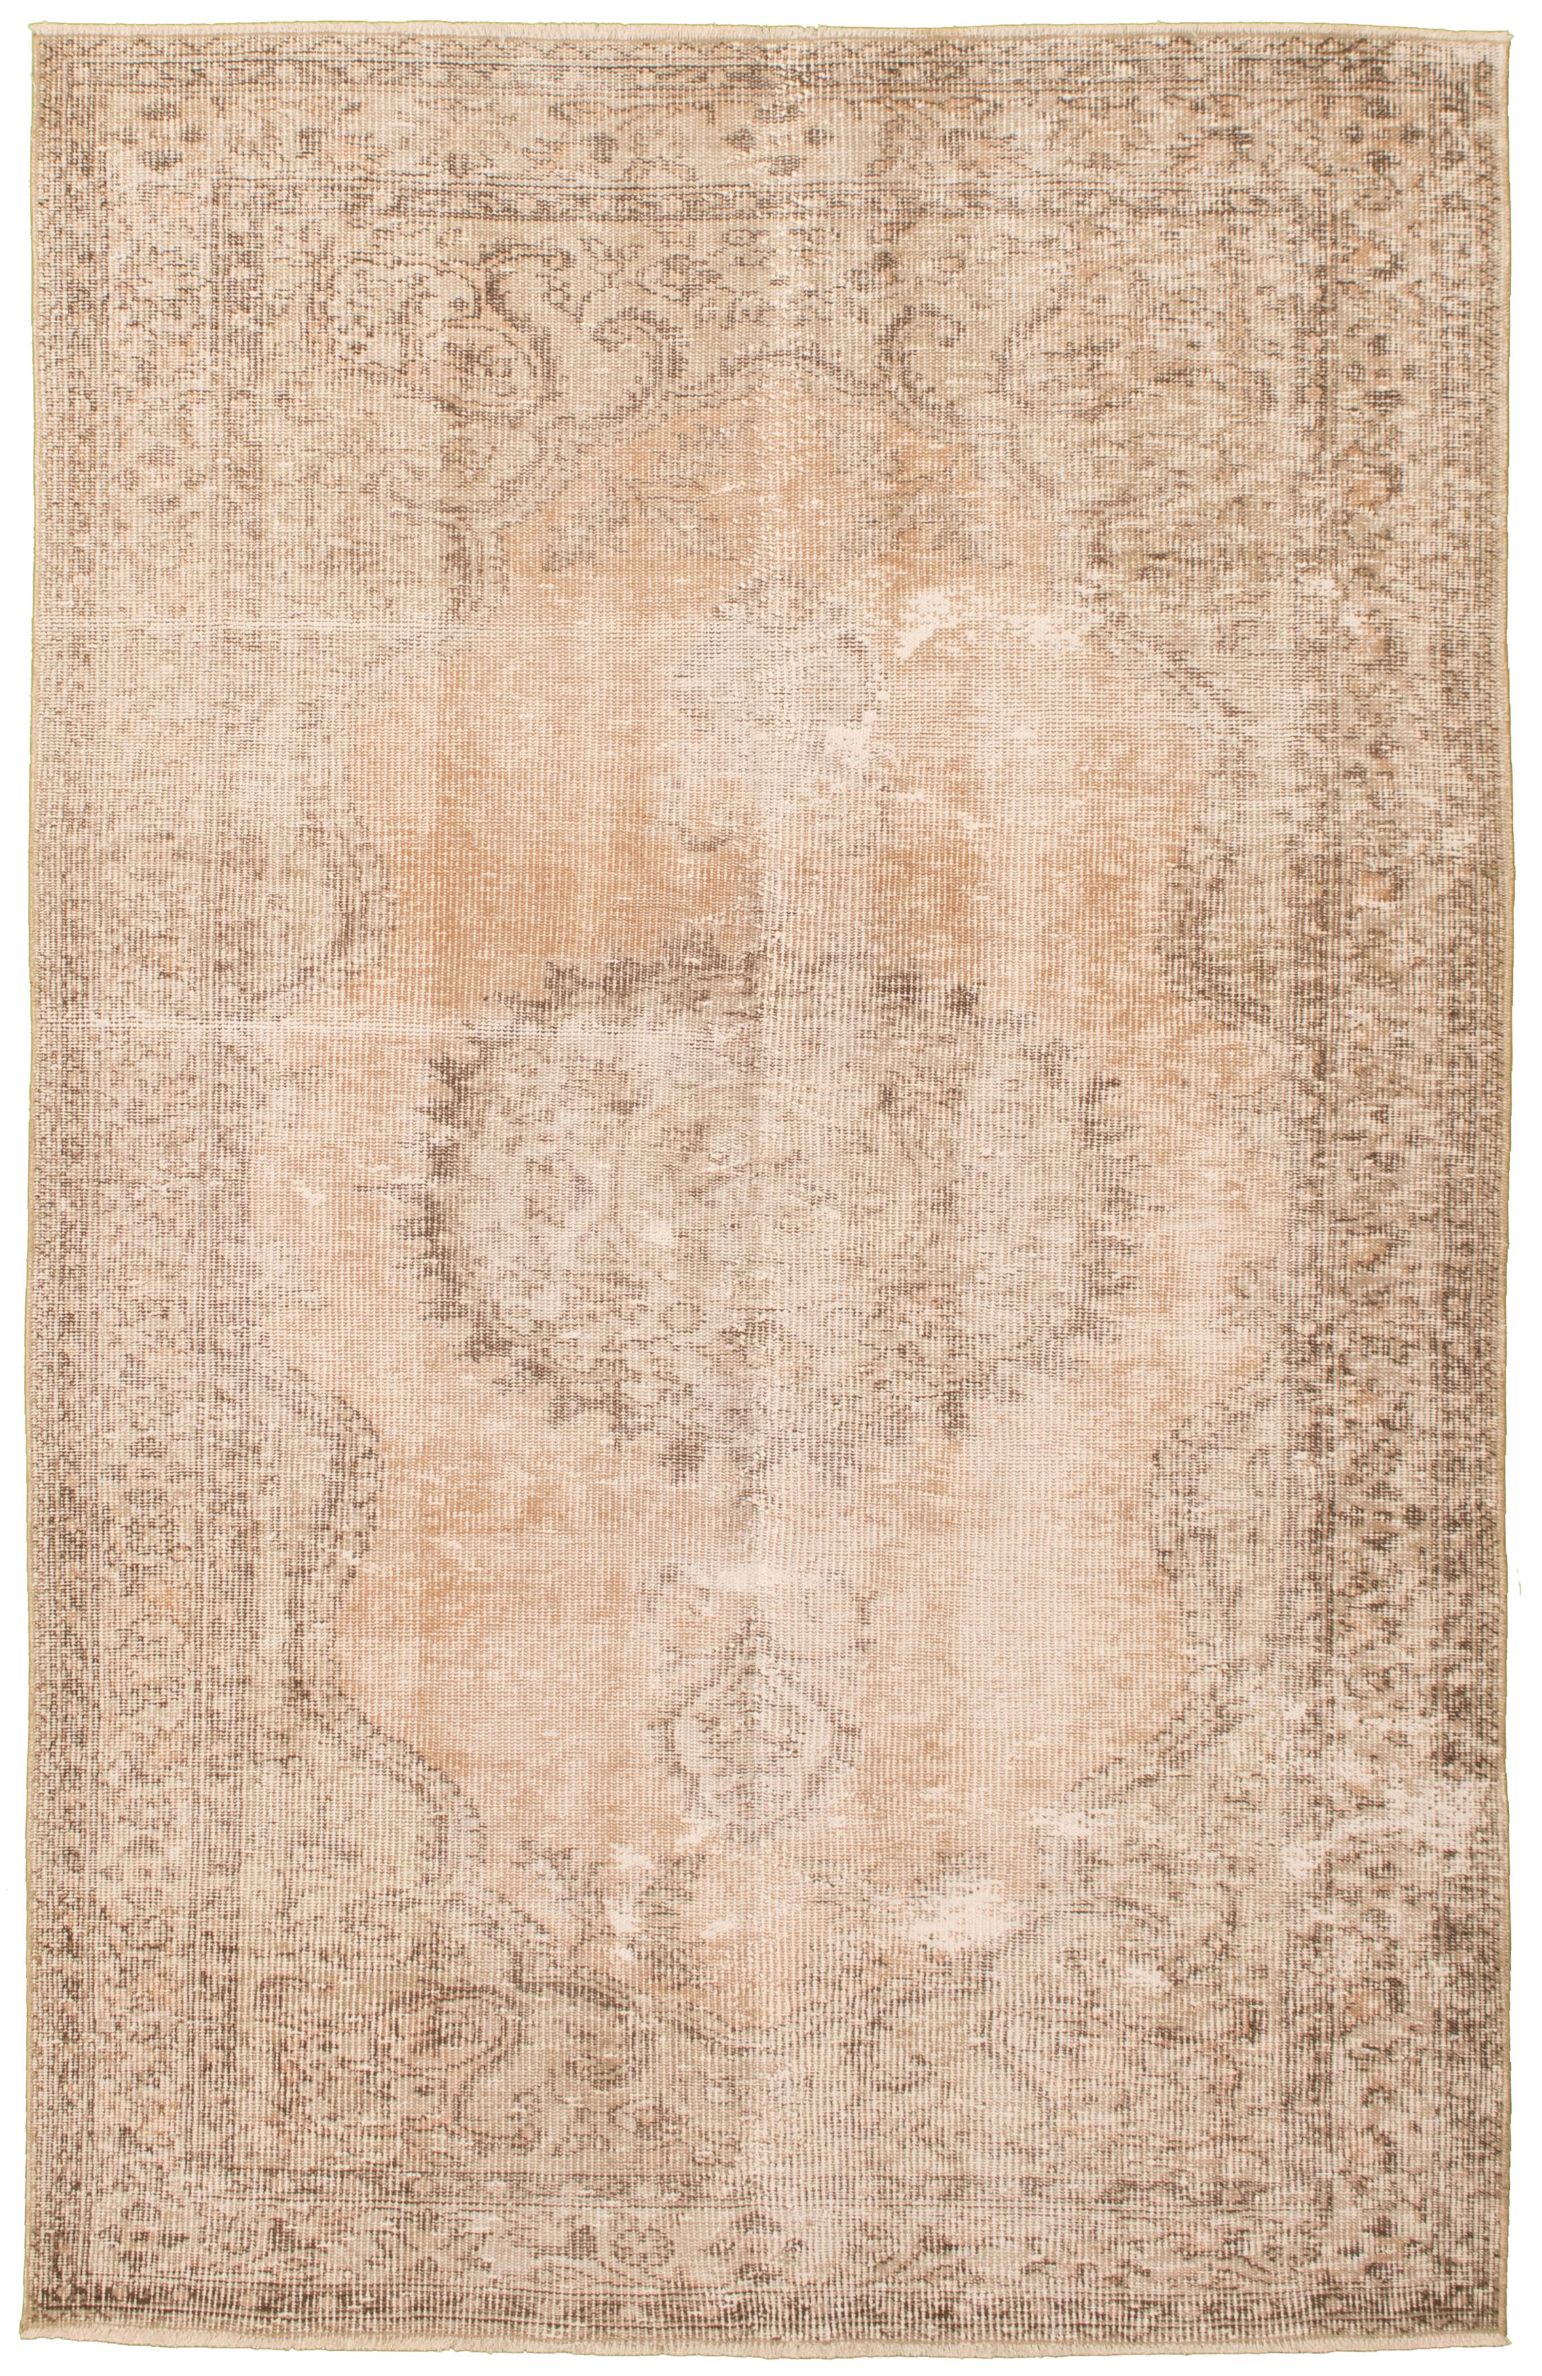 Hand-knotted Antalya Vintage Tan Wool Rug 5'3" x 8'6" Size: 5'3" x 8'6"  